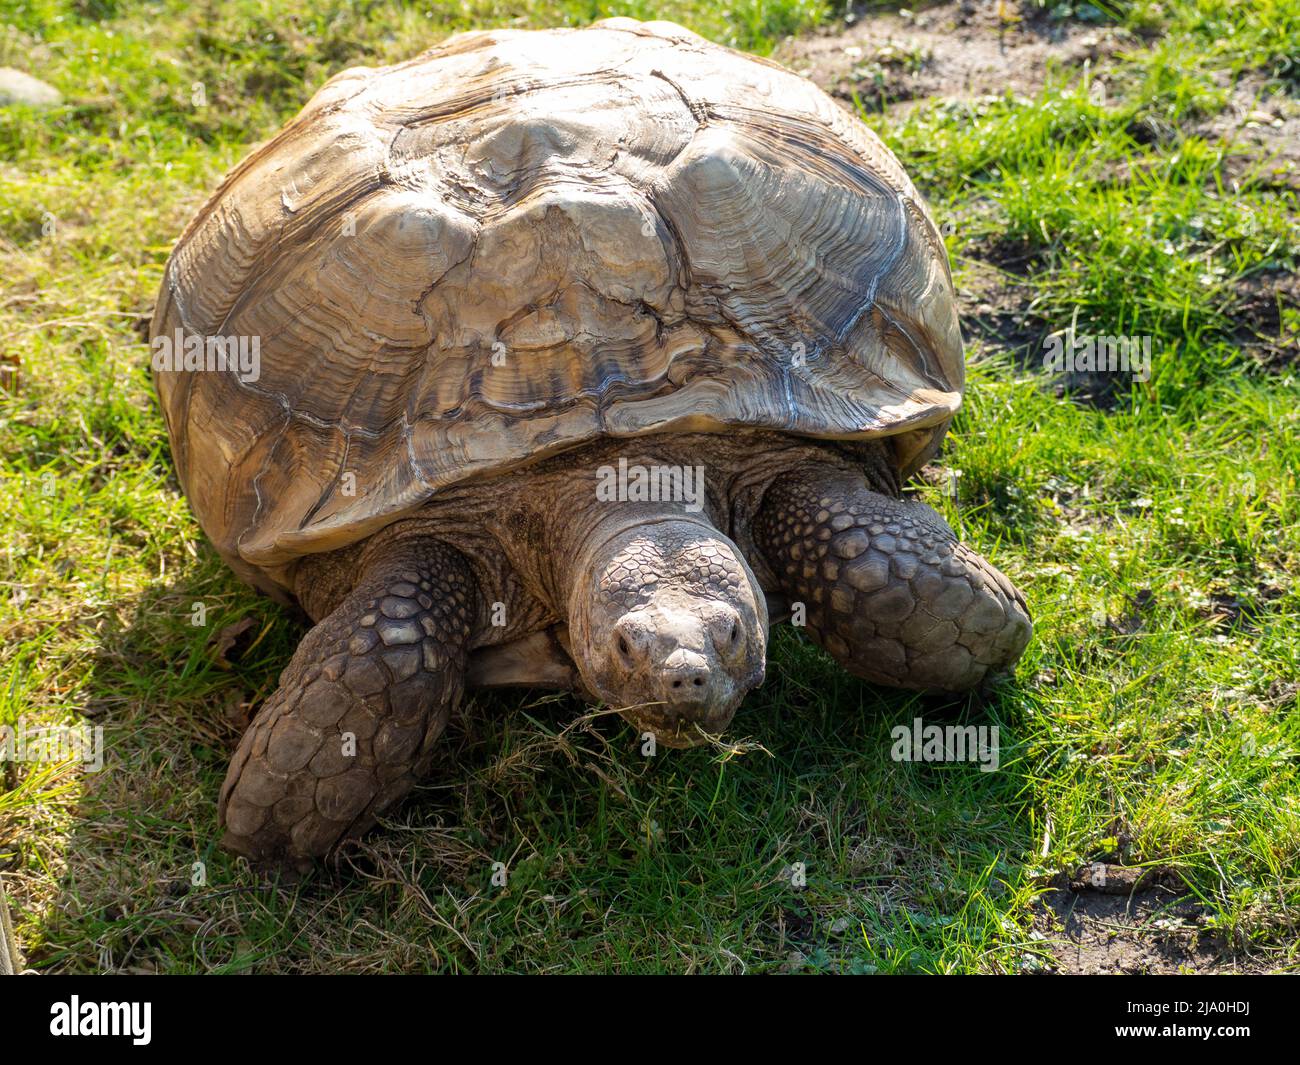 Giant tortoise chewing on a blade of grass Stock Photo